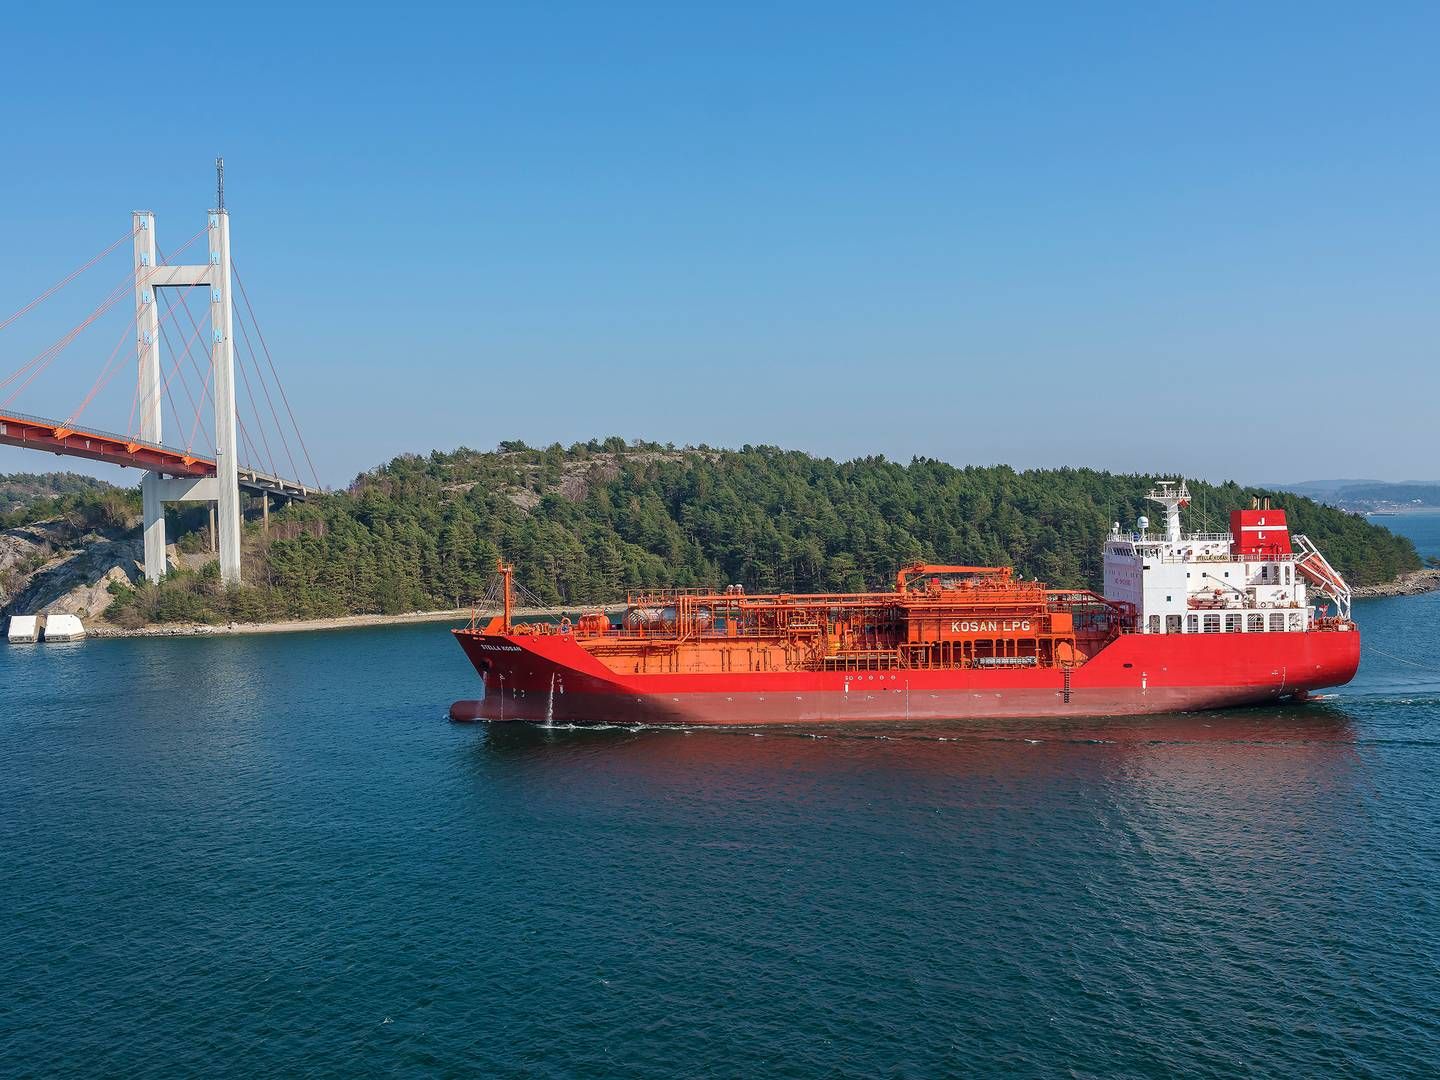 BW Epic Kosan owns and operates the world's largest fleet of gas tankers, transporting LPG, petrochemicals, and specialty gases. | Photo: Pr / J. Lauritzen